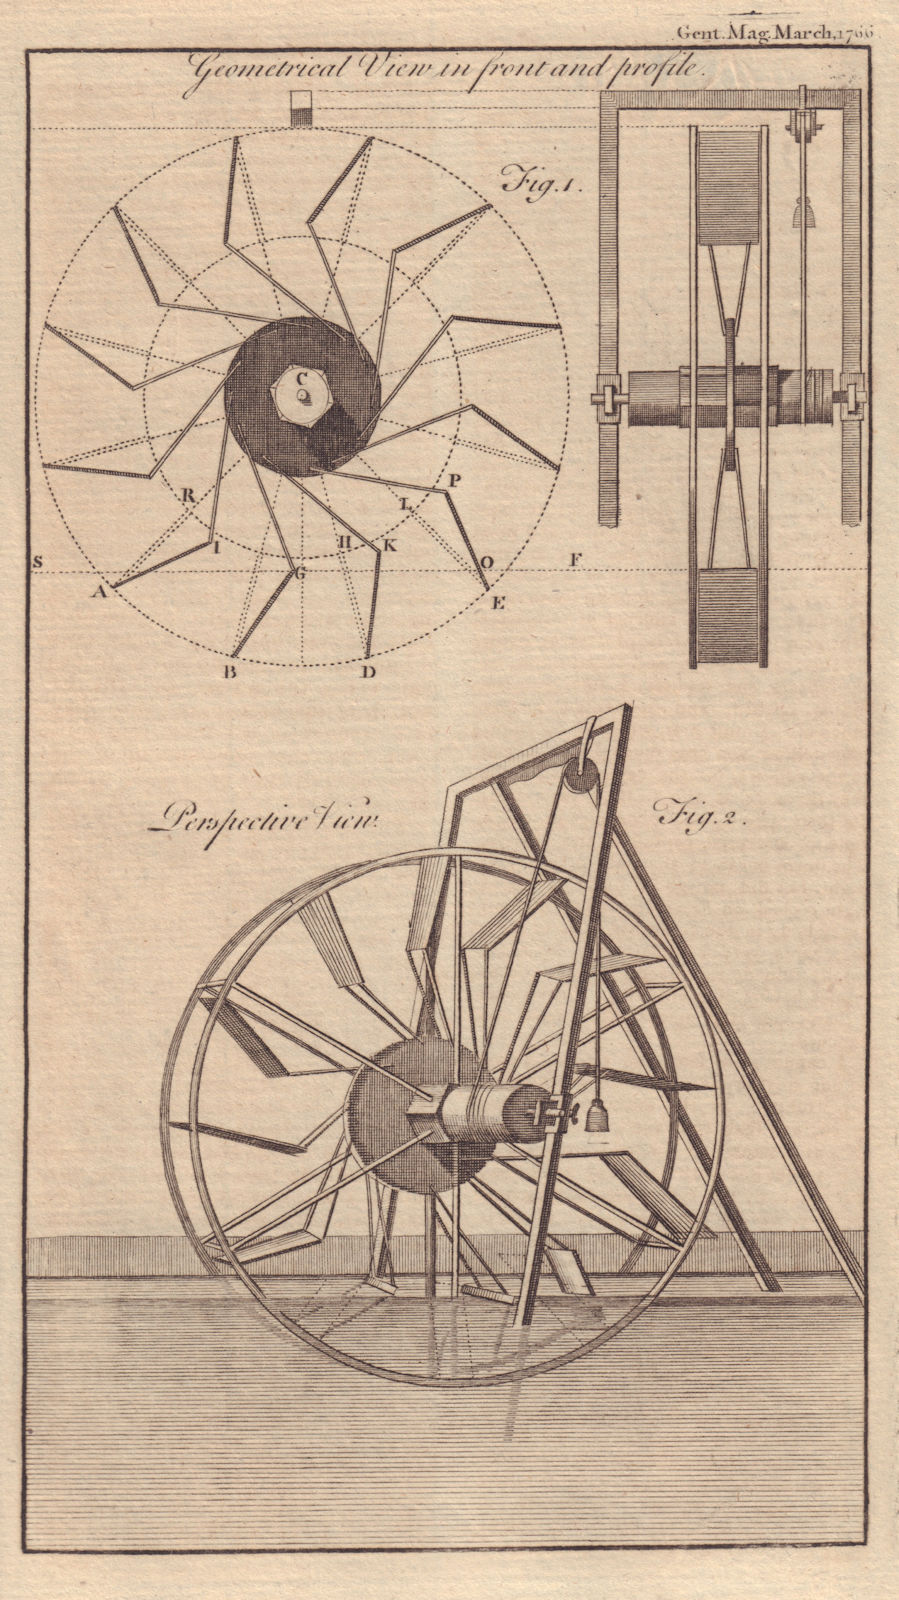 Associate Product A Water Wheel, by Deparcieux. Geometrical & Perspective Views. Science 1766